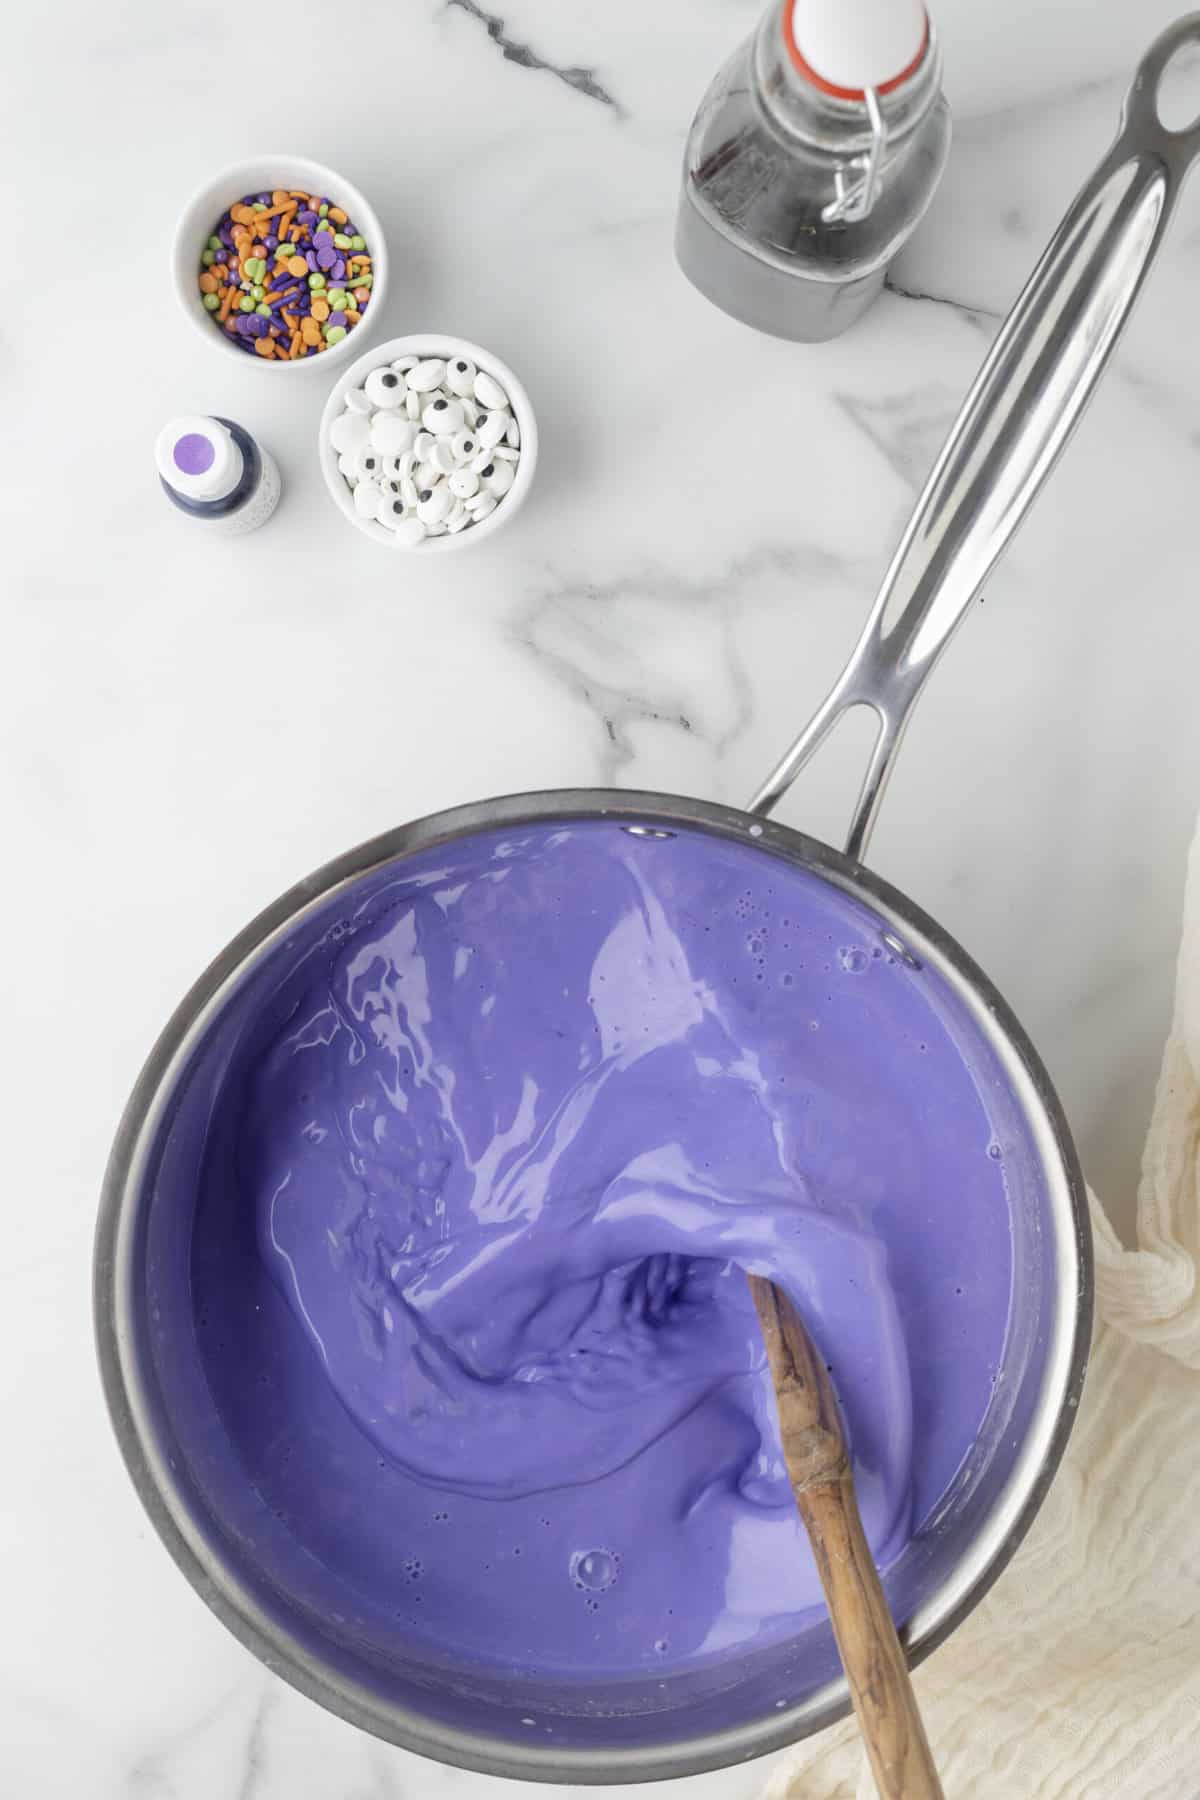 Mix the Food Coloring in well until its to a purple that you like.